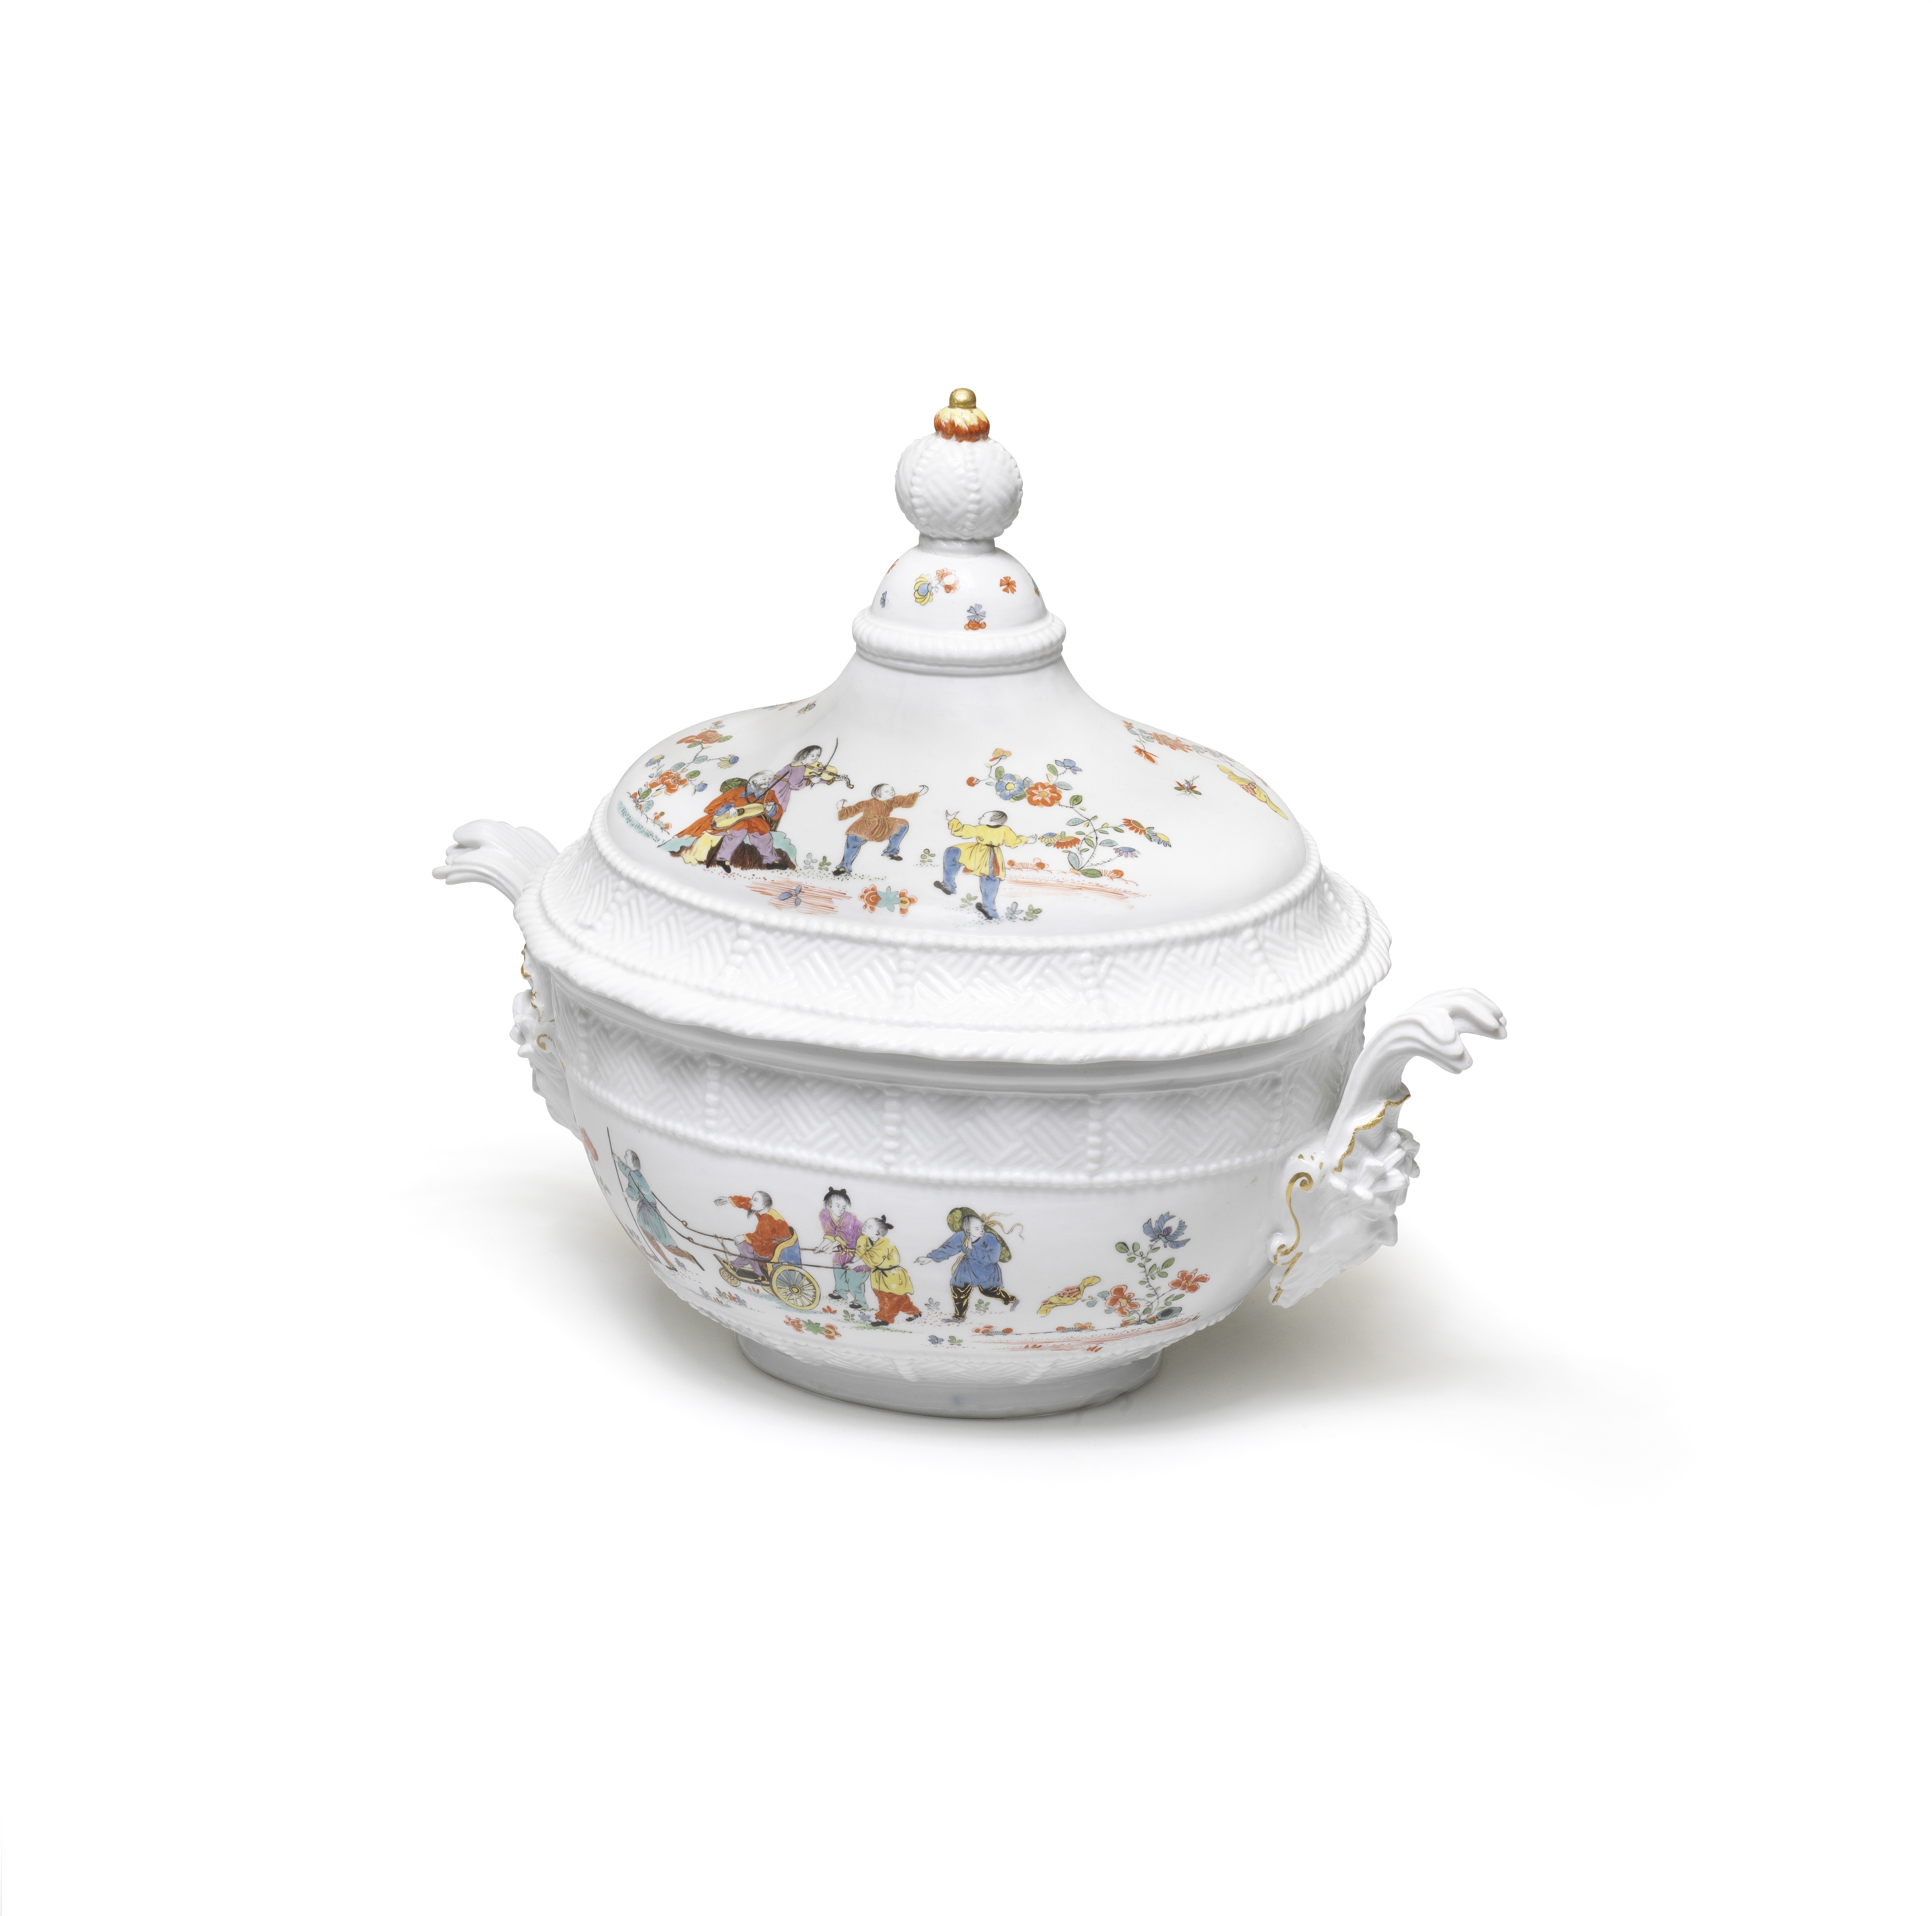 A Meissen oval double-handled tureen and cover, circa 1736